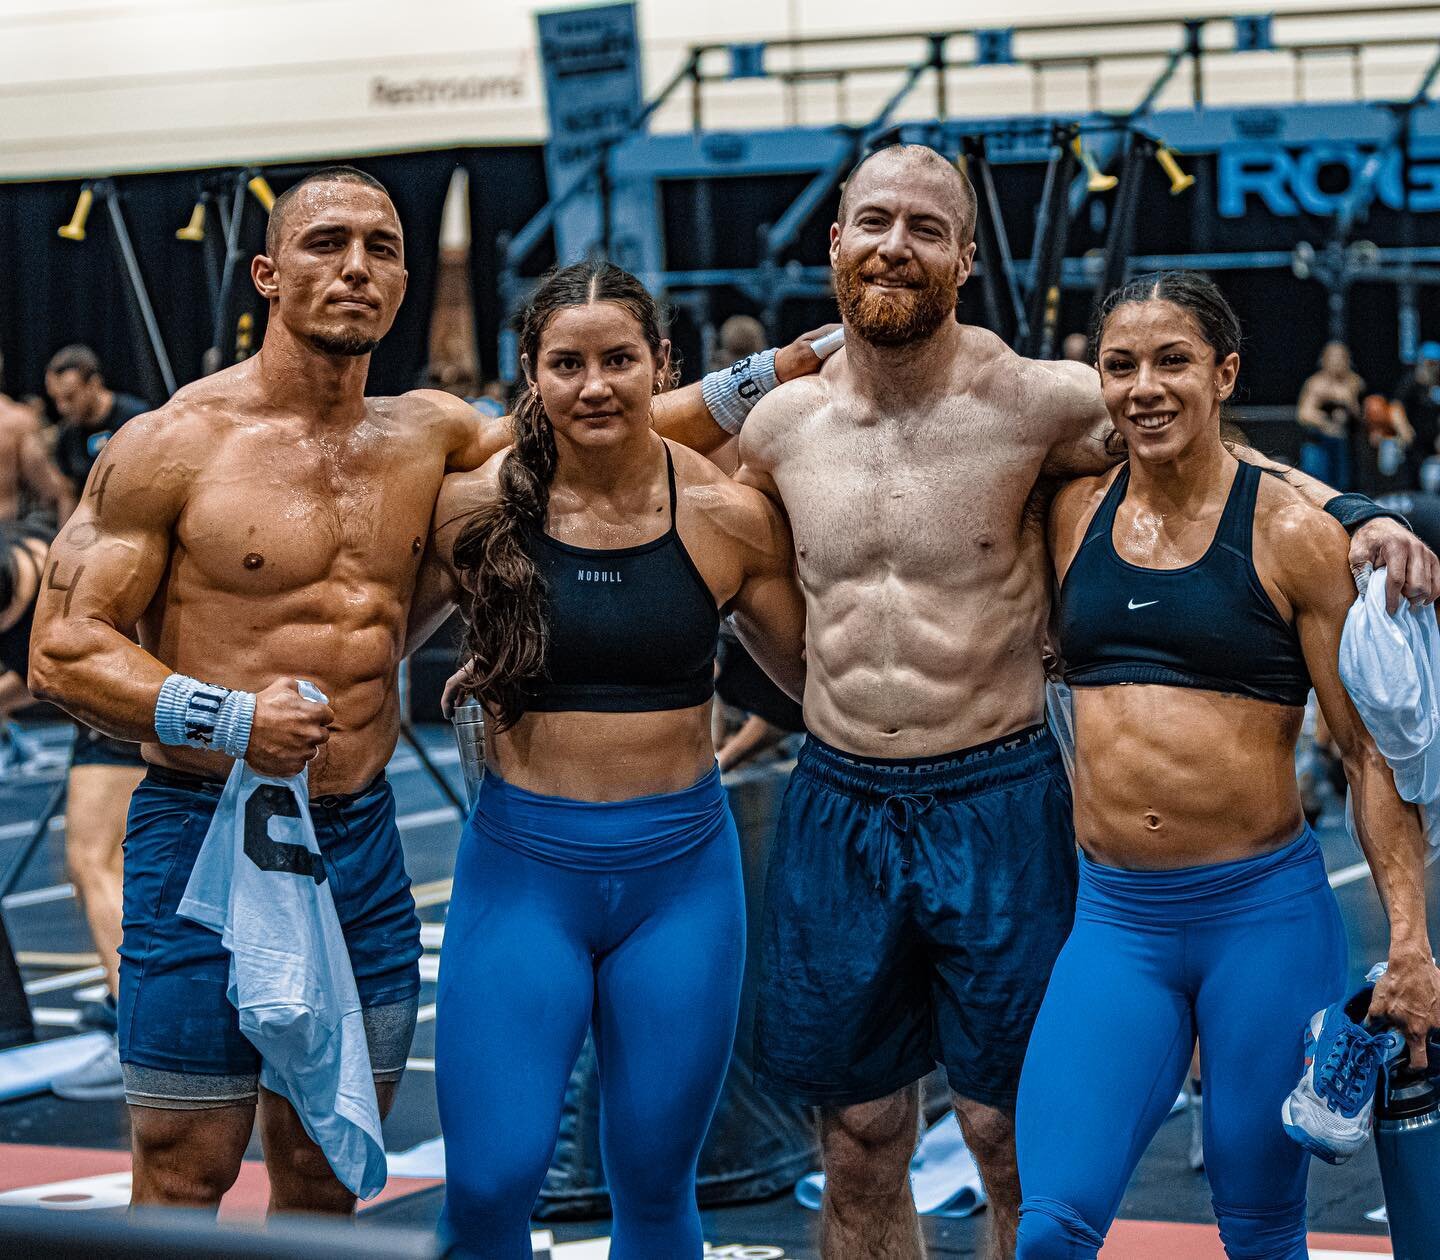 If you watched Event 5 you heard the commentary describing this group of athletes in short succinct sentences that slowly transformed as the weights got heavier&hellip; 

&ldquo;Outside looking in&rdquo;
&ldquo;They are right there&rdquo;
&ldquo;Look